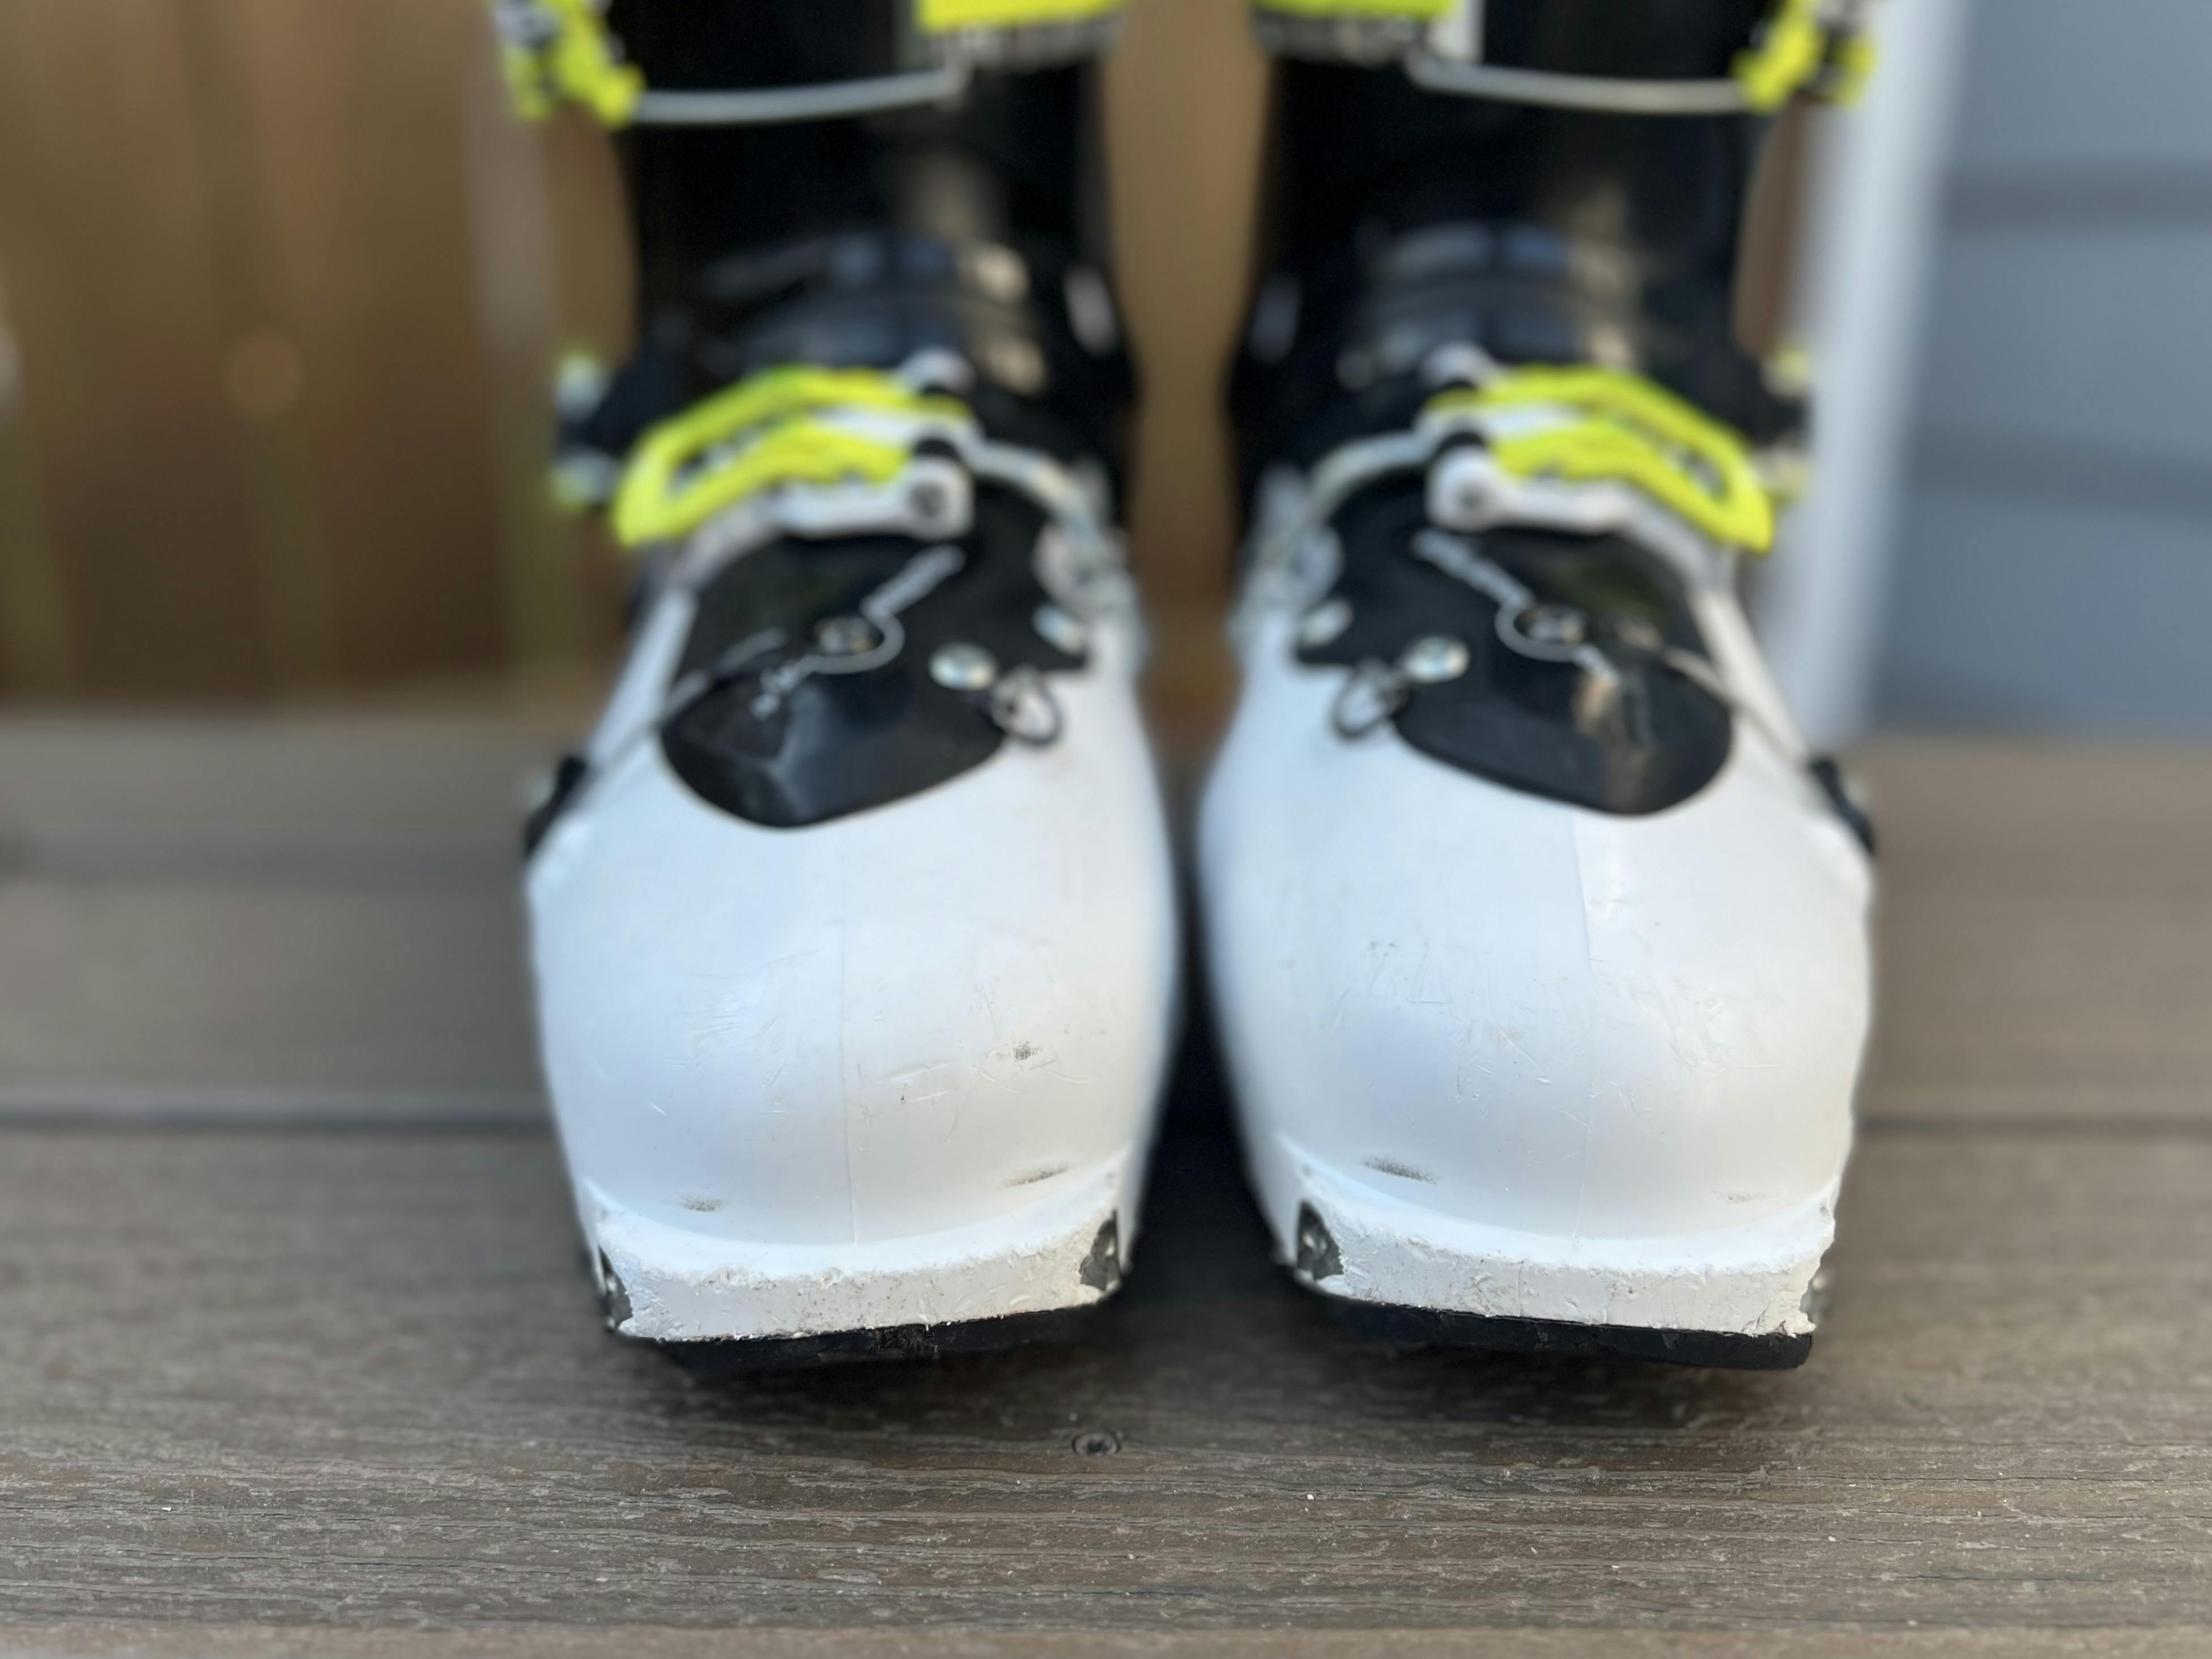 Toe wear on the Maestrale RS Ski boots.